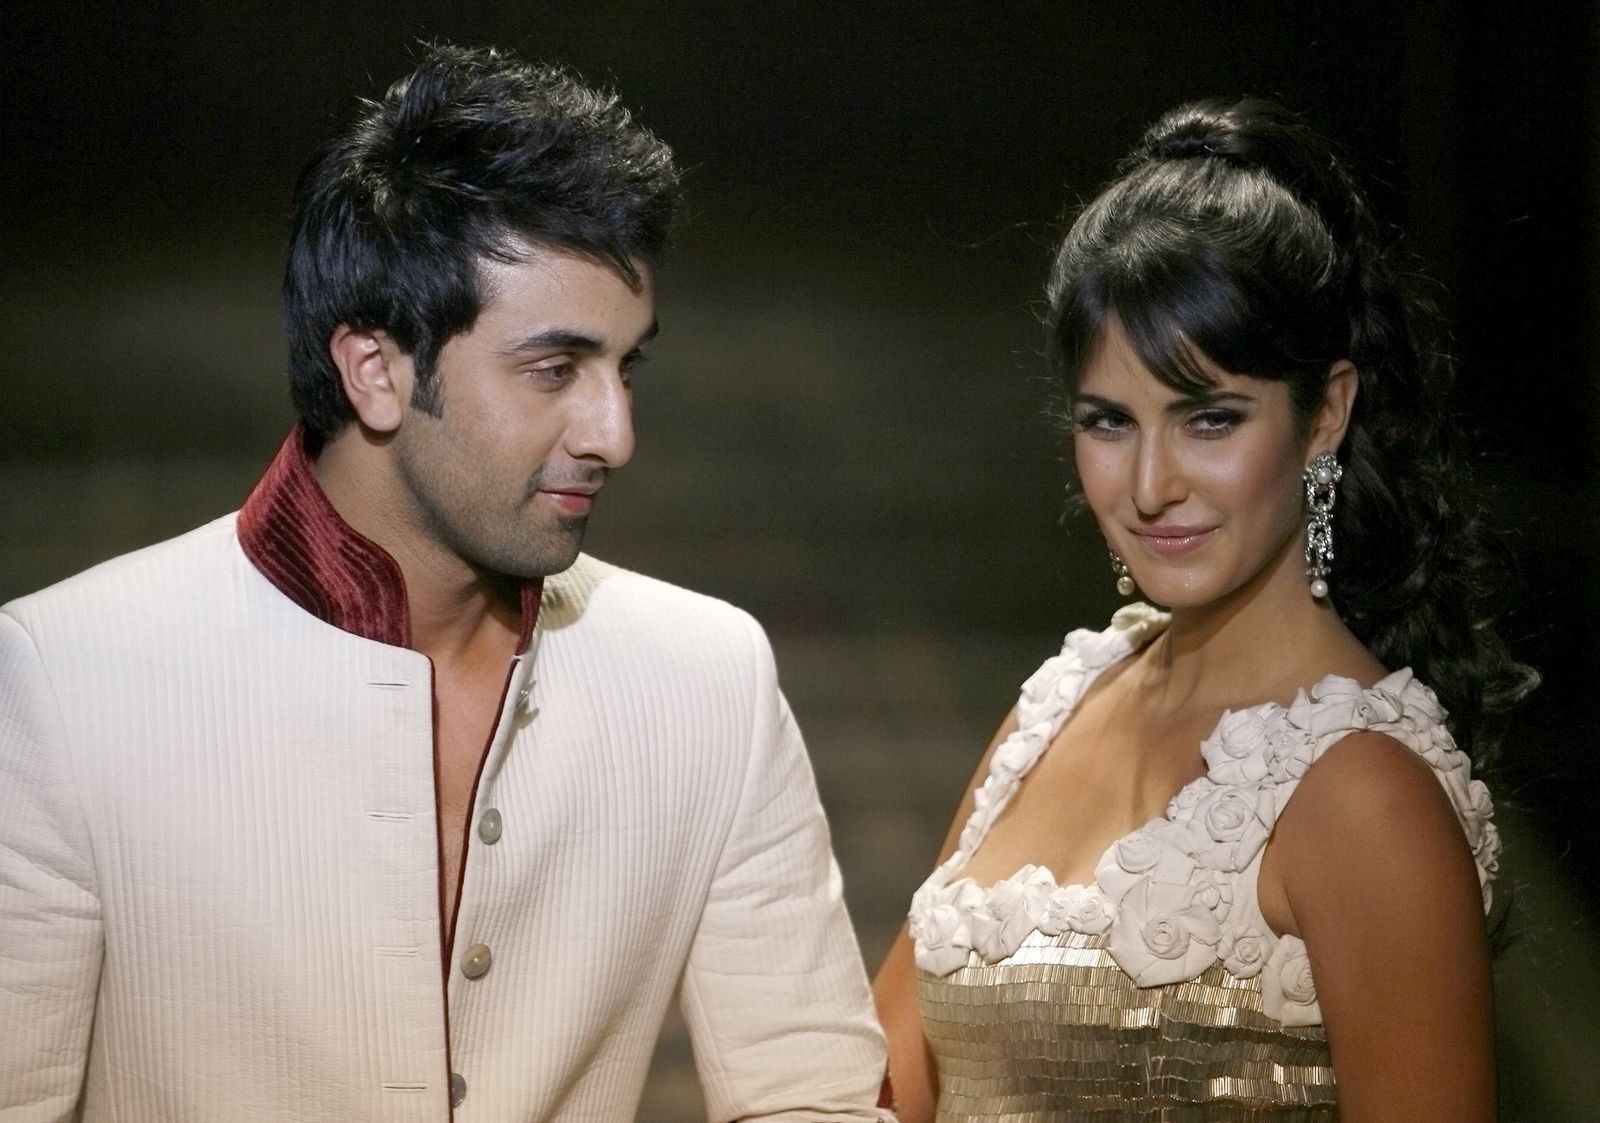 It Will Never Happen Again: Katrina Kaif On Working With Ranbir Kapoor In The Future